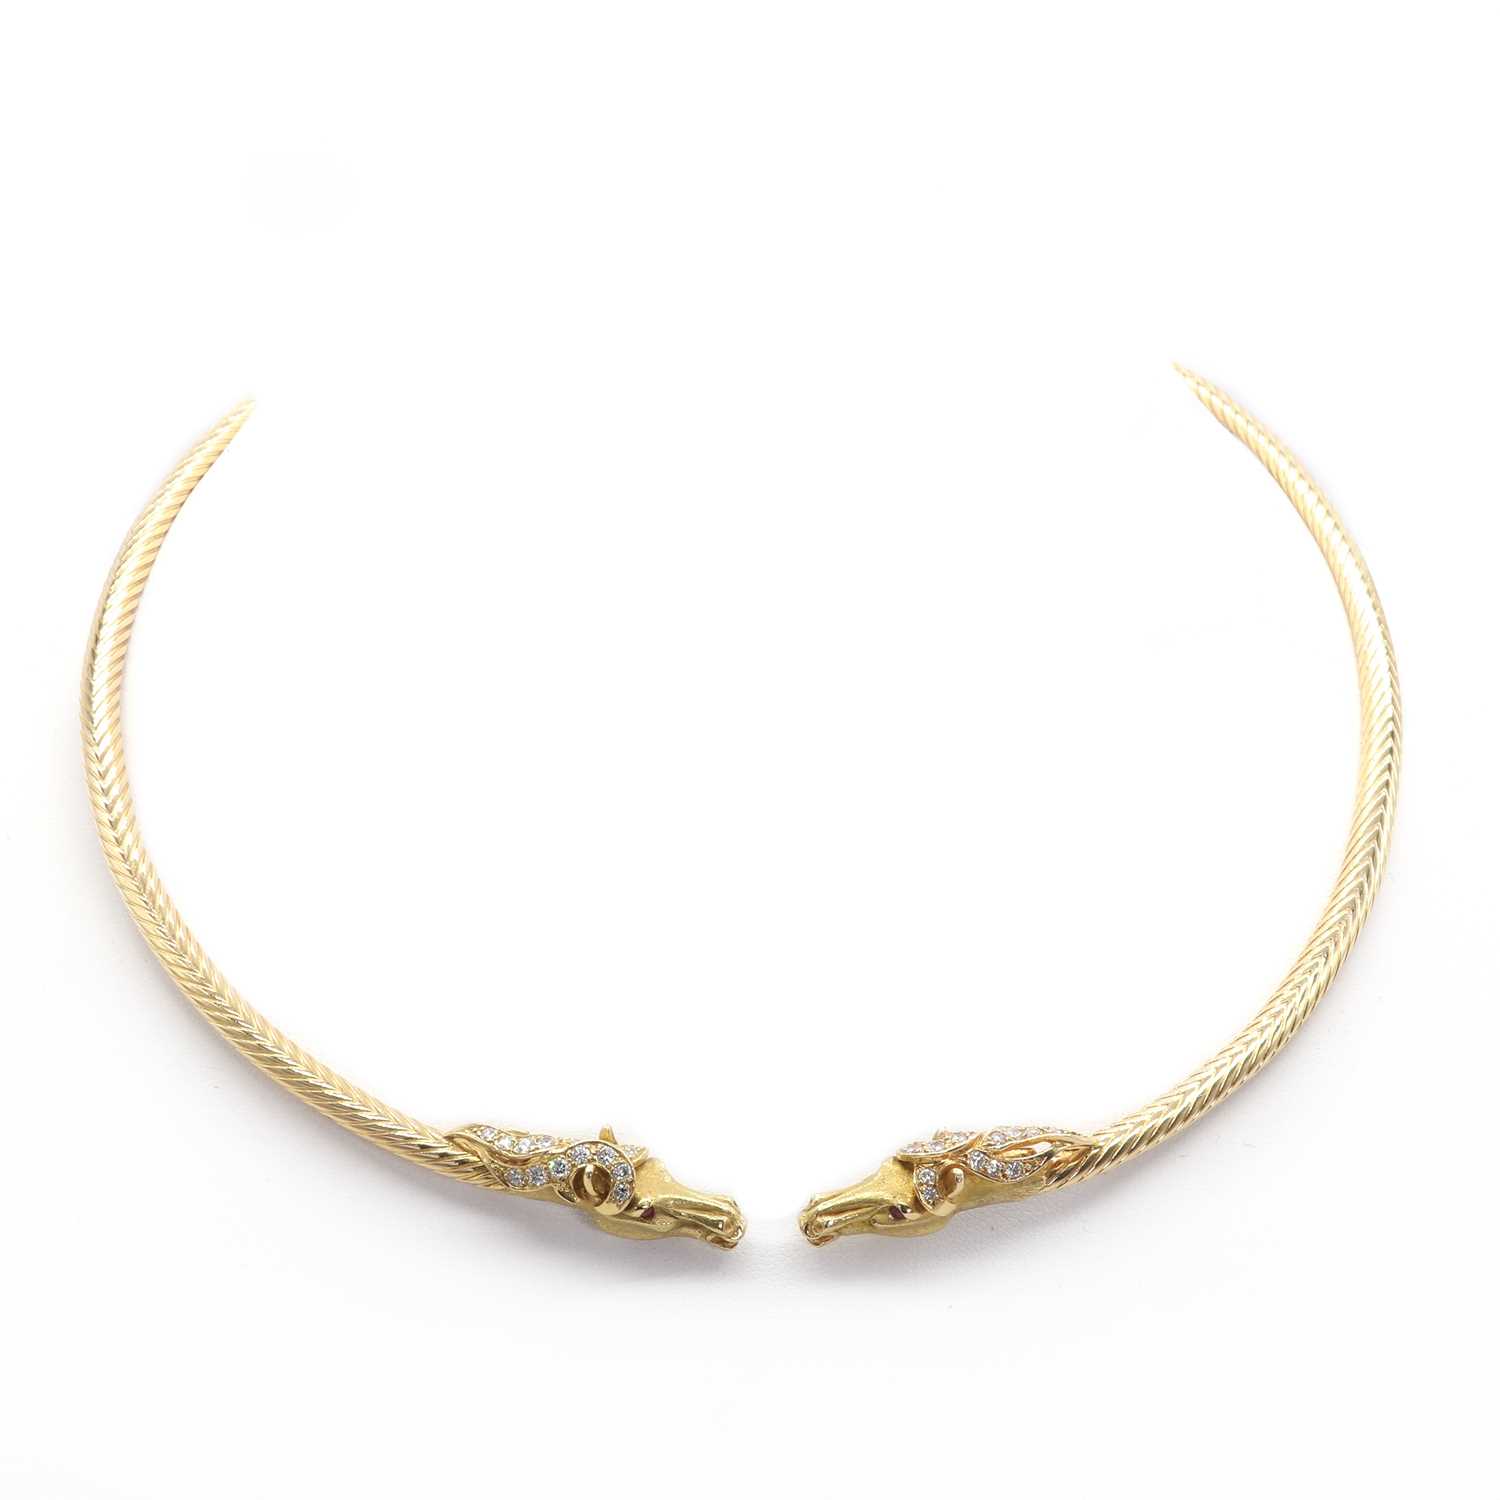 Open collar necklace in gold - MAM